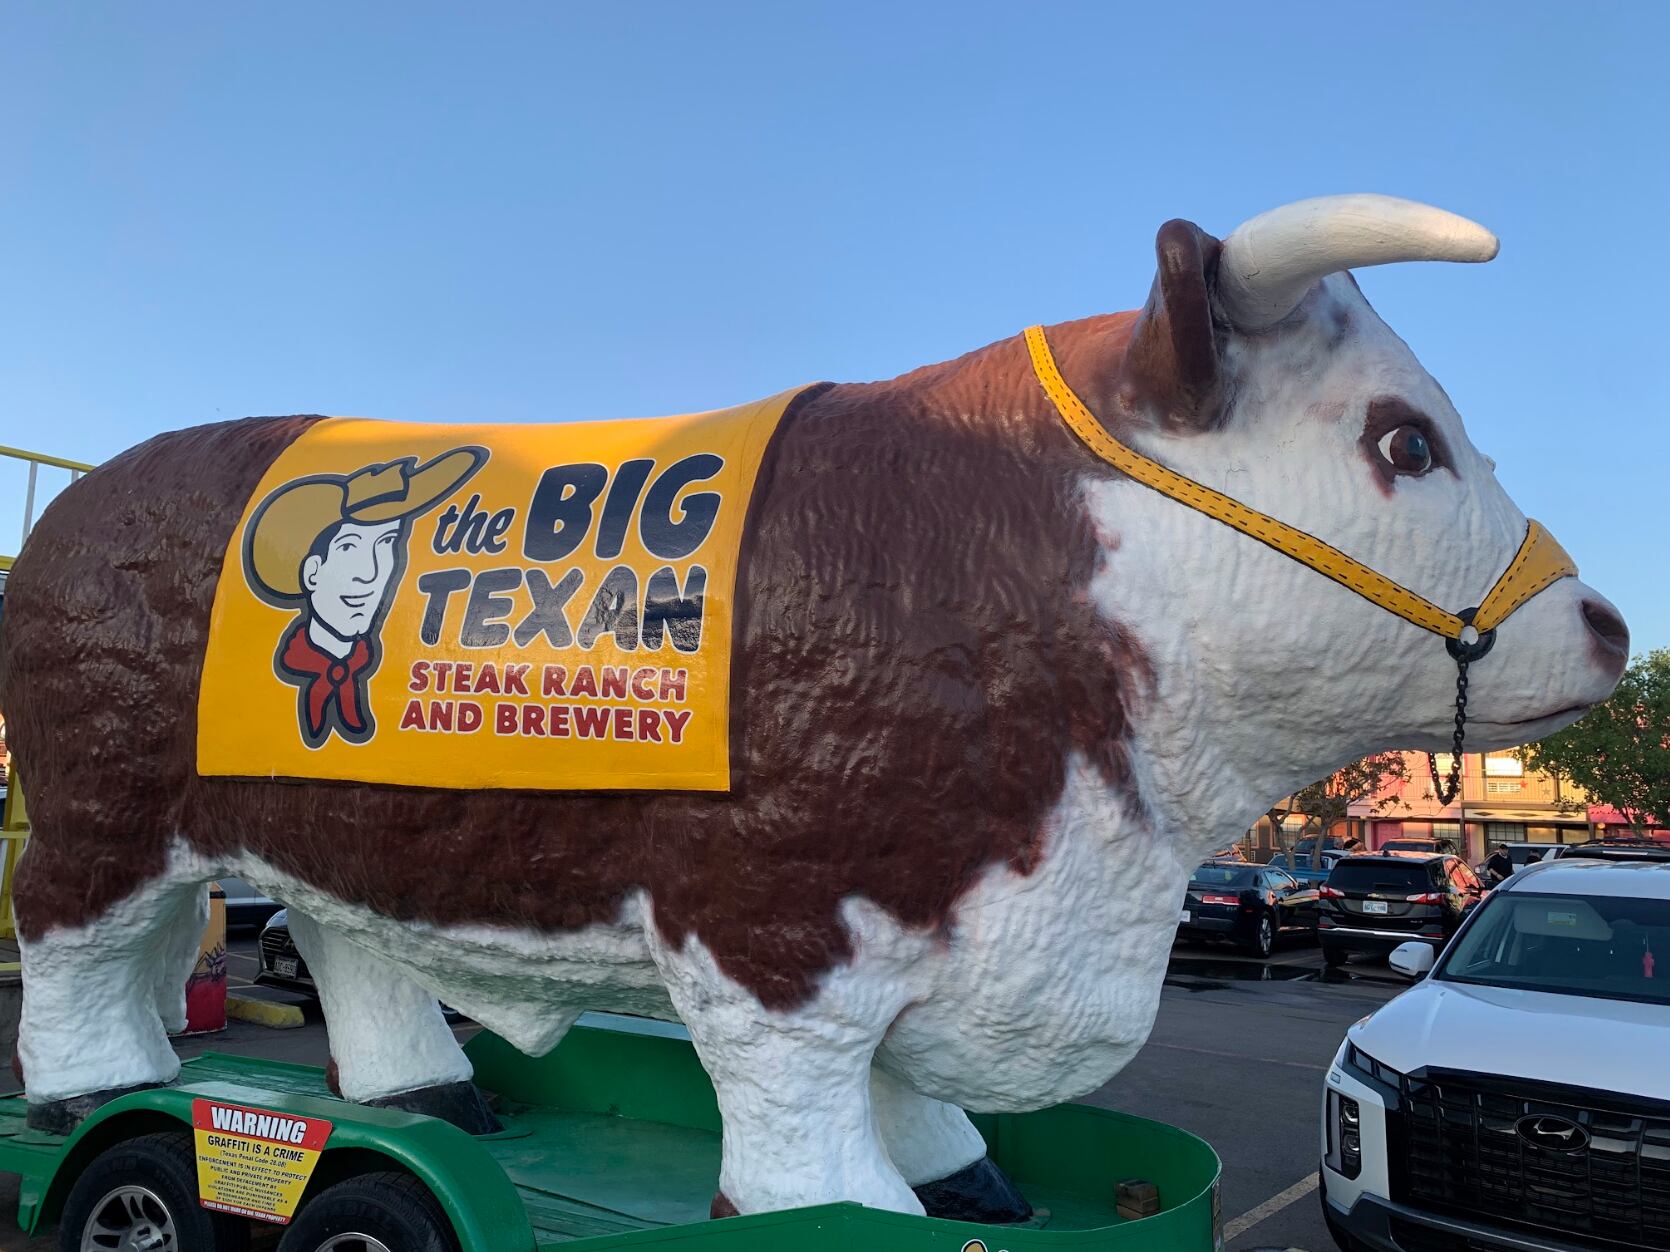 The famous The Big Texan Steak Ranch & Brewery in Amarillo is guarded by a larger than life fiberglass cow.